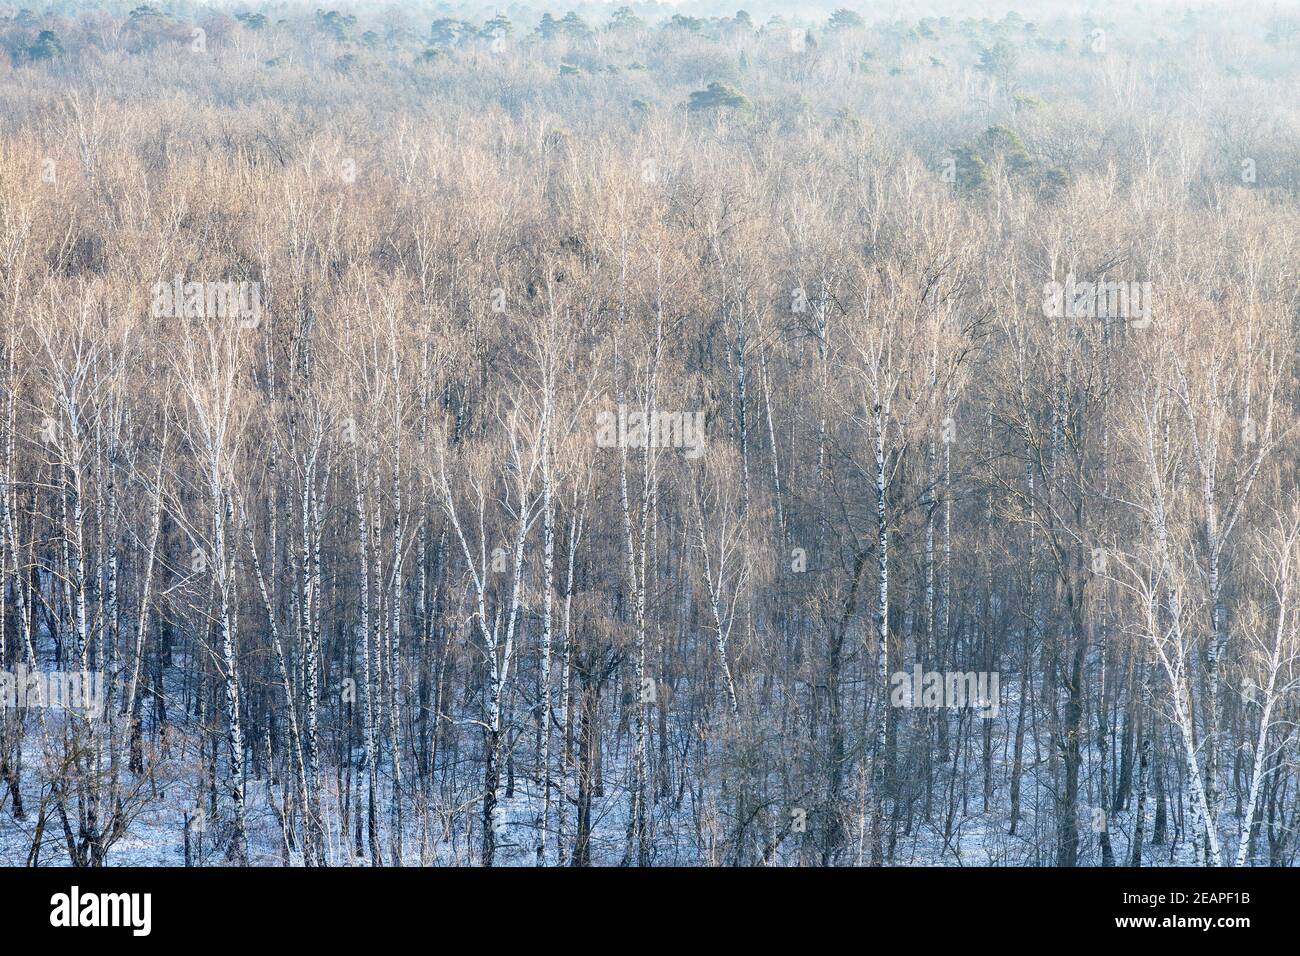 above view of bare trees in snow-covered forest Stock Photo